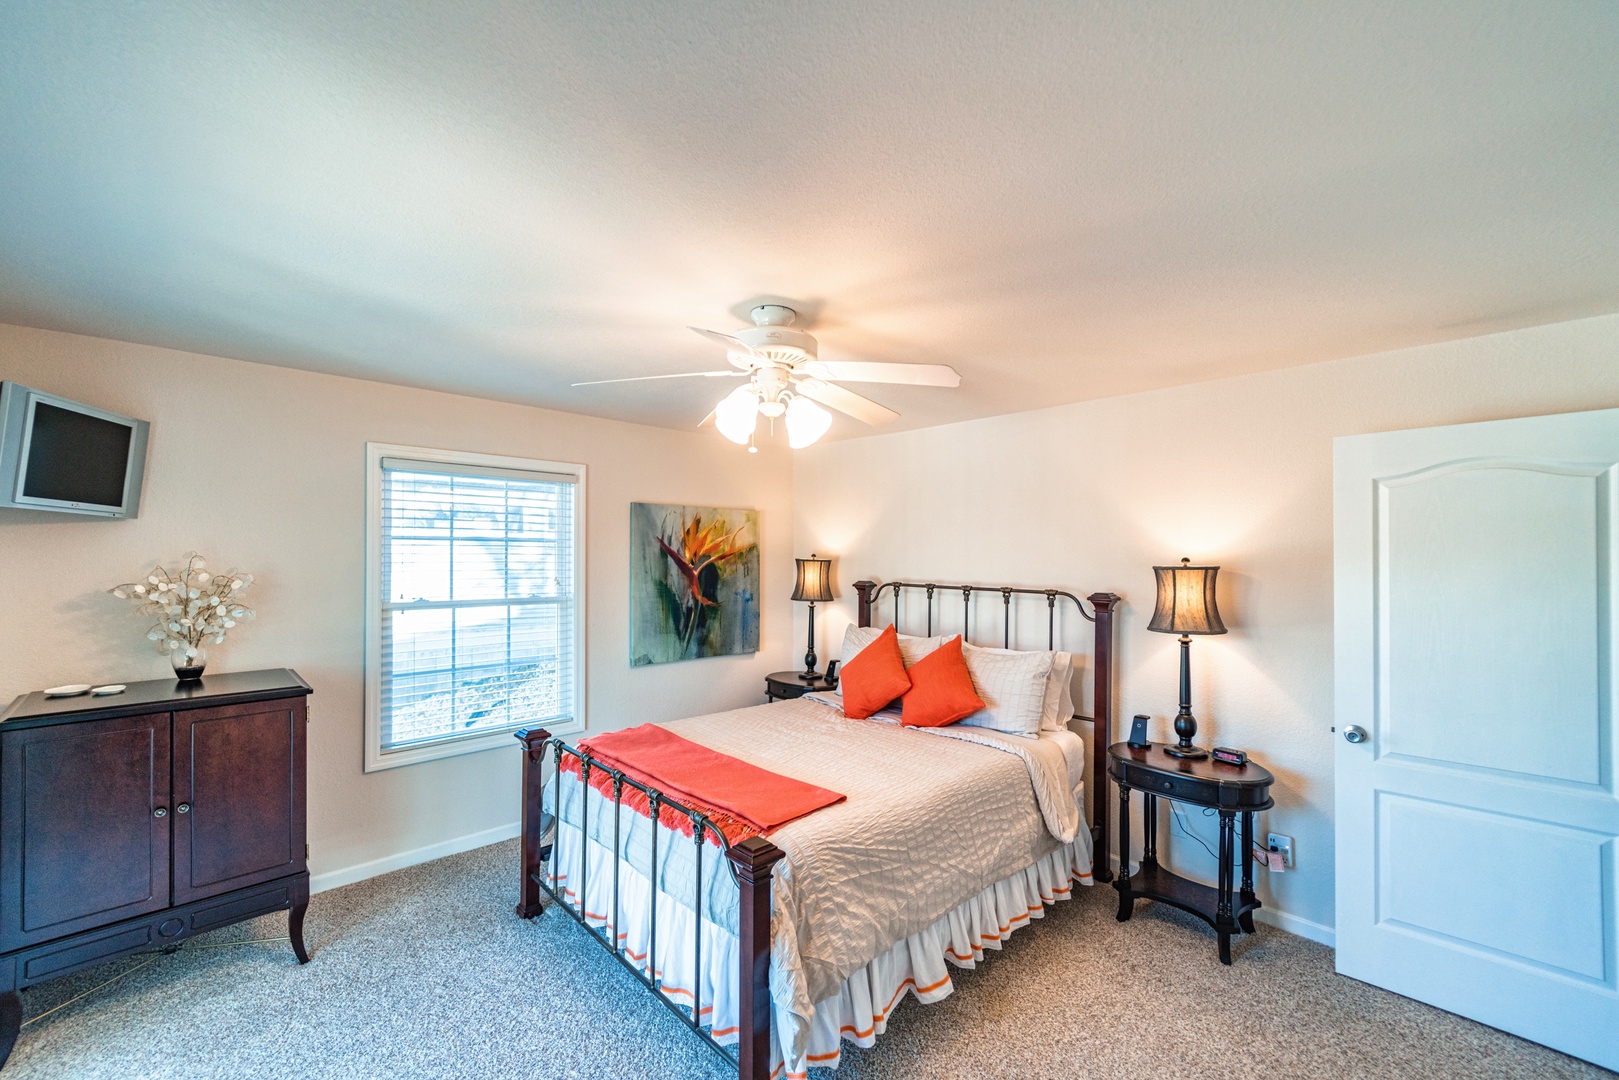 The first of 3 serene bedrooms includes a queen bed, TV, & deck access